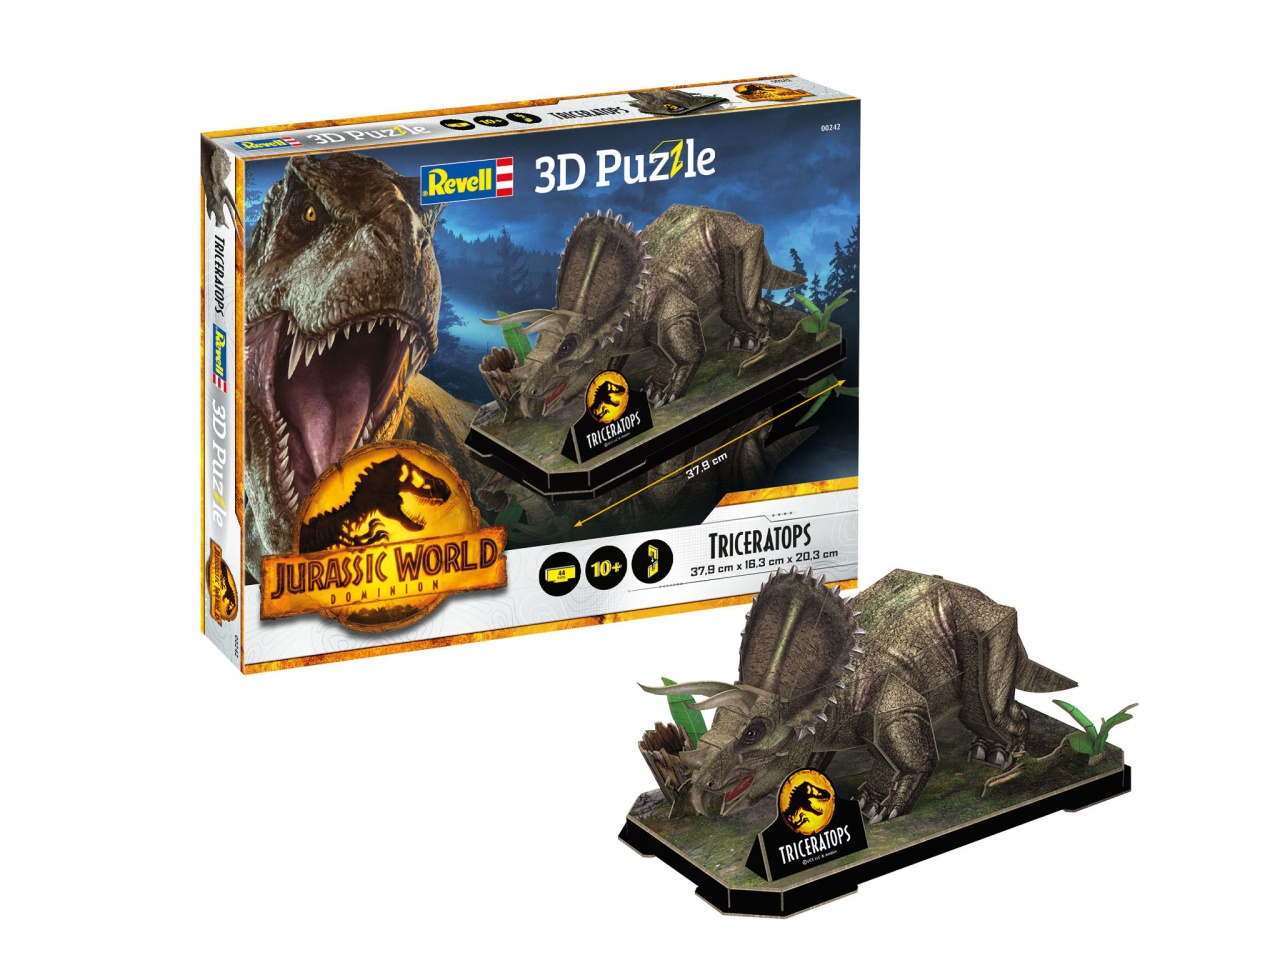 Revell 00242 Jurassic World 3D Puzzle Triceratops